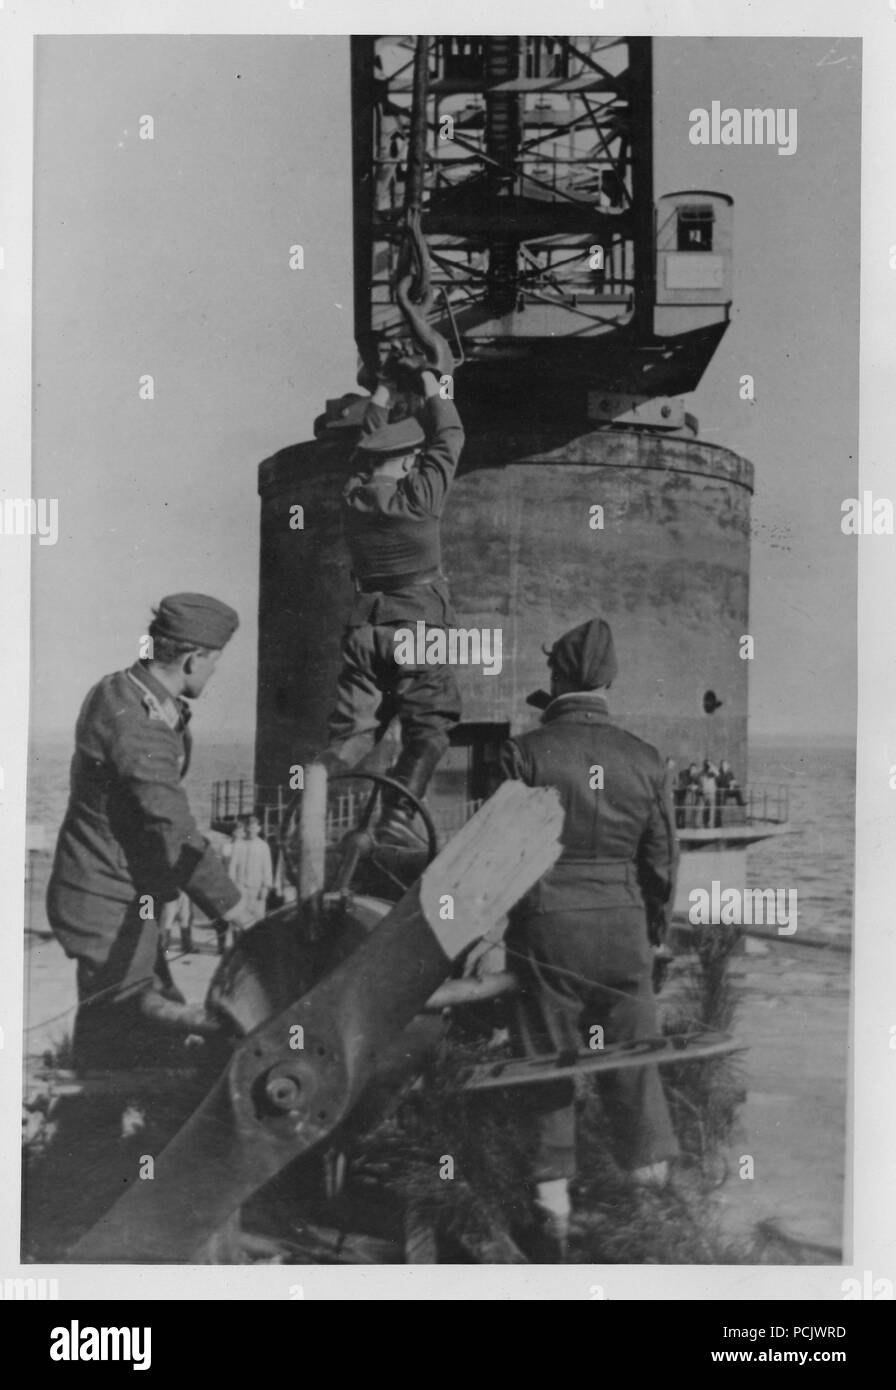 Image from the photo album of Oberleutnant Wilhelm Gaul - An officer of 2. Staffel, Küstenfliegergruppe 906 is hoisted by the crane used to lift the unit's Heinkel He 115 floatplanes into the water, at Brest in 1941 or 1942. Stock Photo